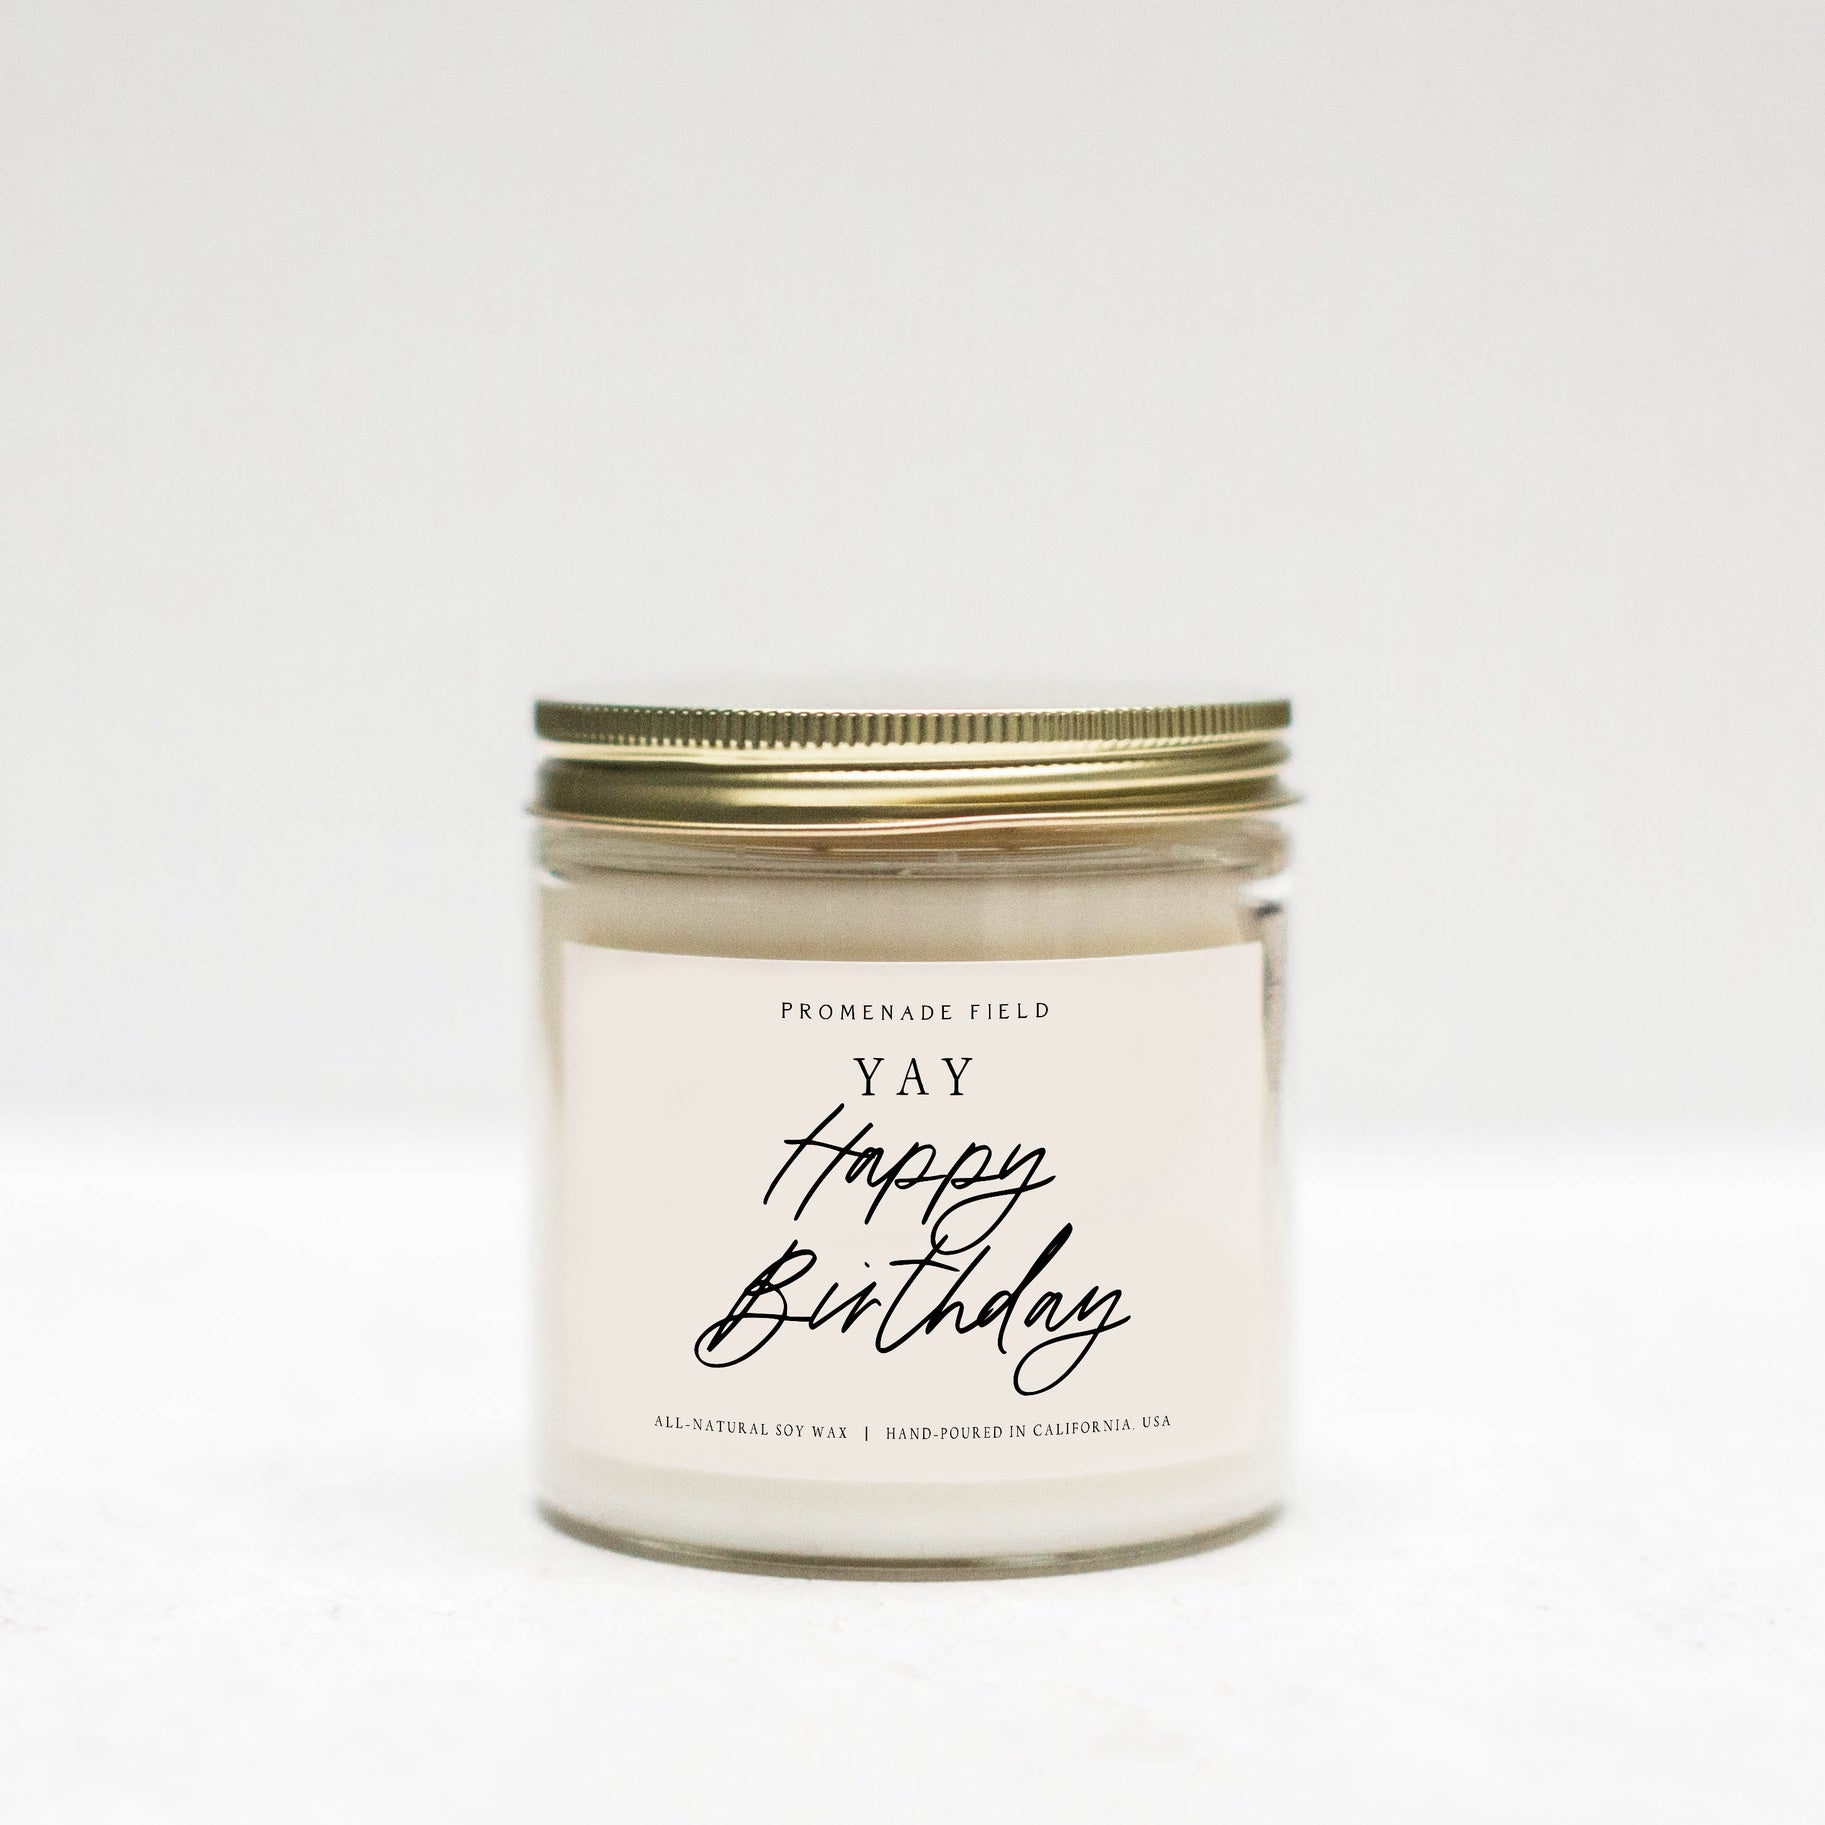 Jar candle with gold lid, white label says "Yay Happy Birthday" in cursive font.